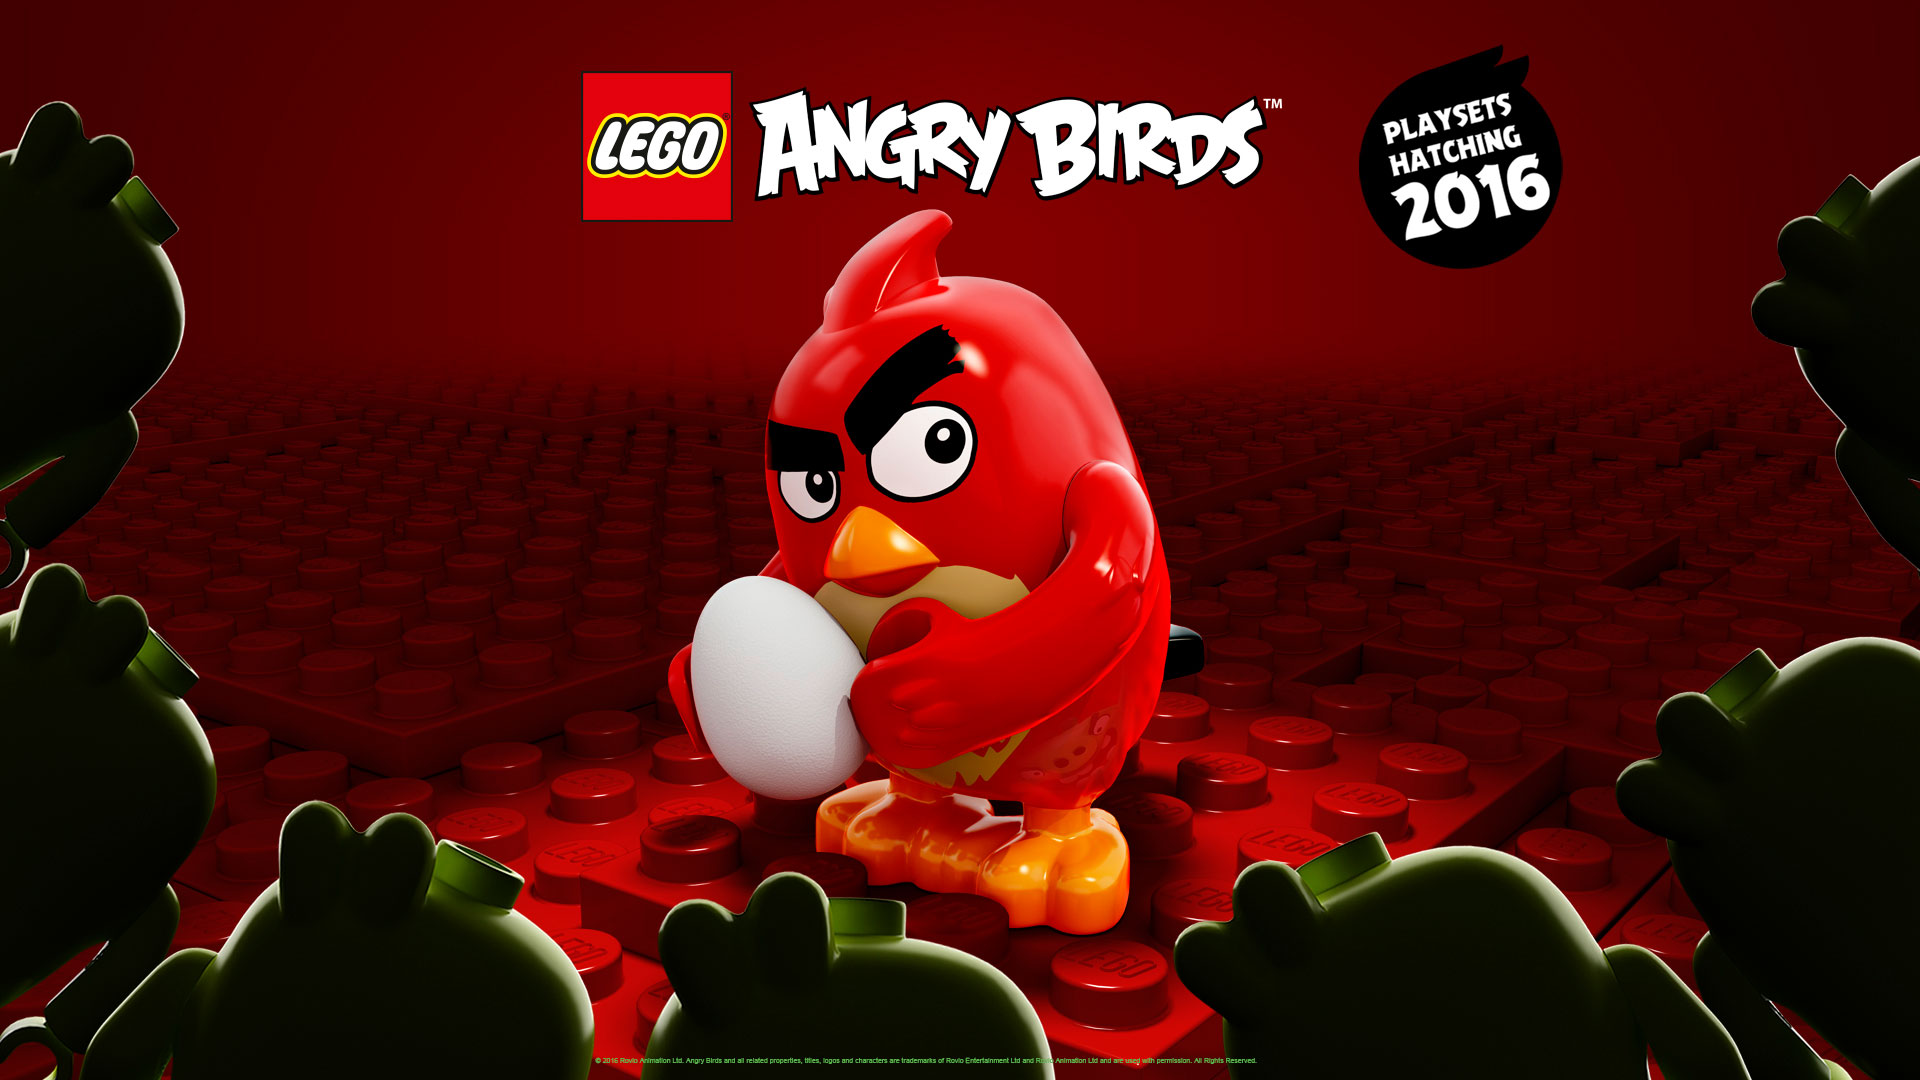 So That’s What A LEGO Angry Bird Looks Like